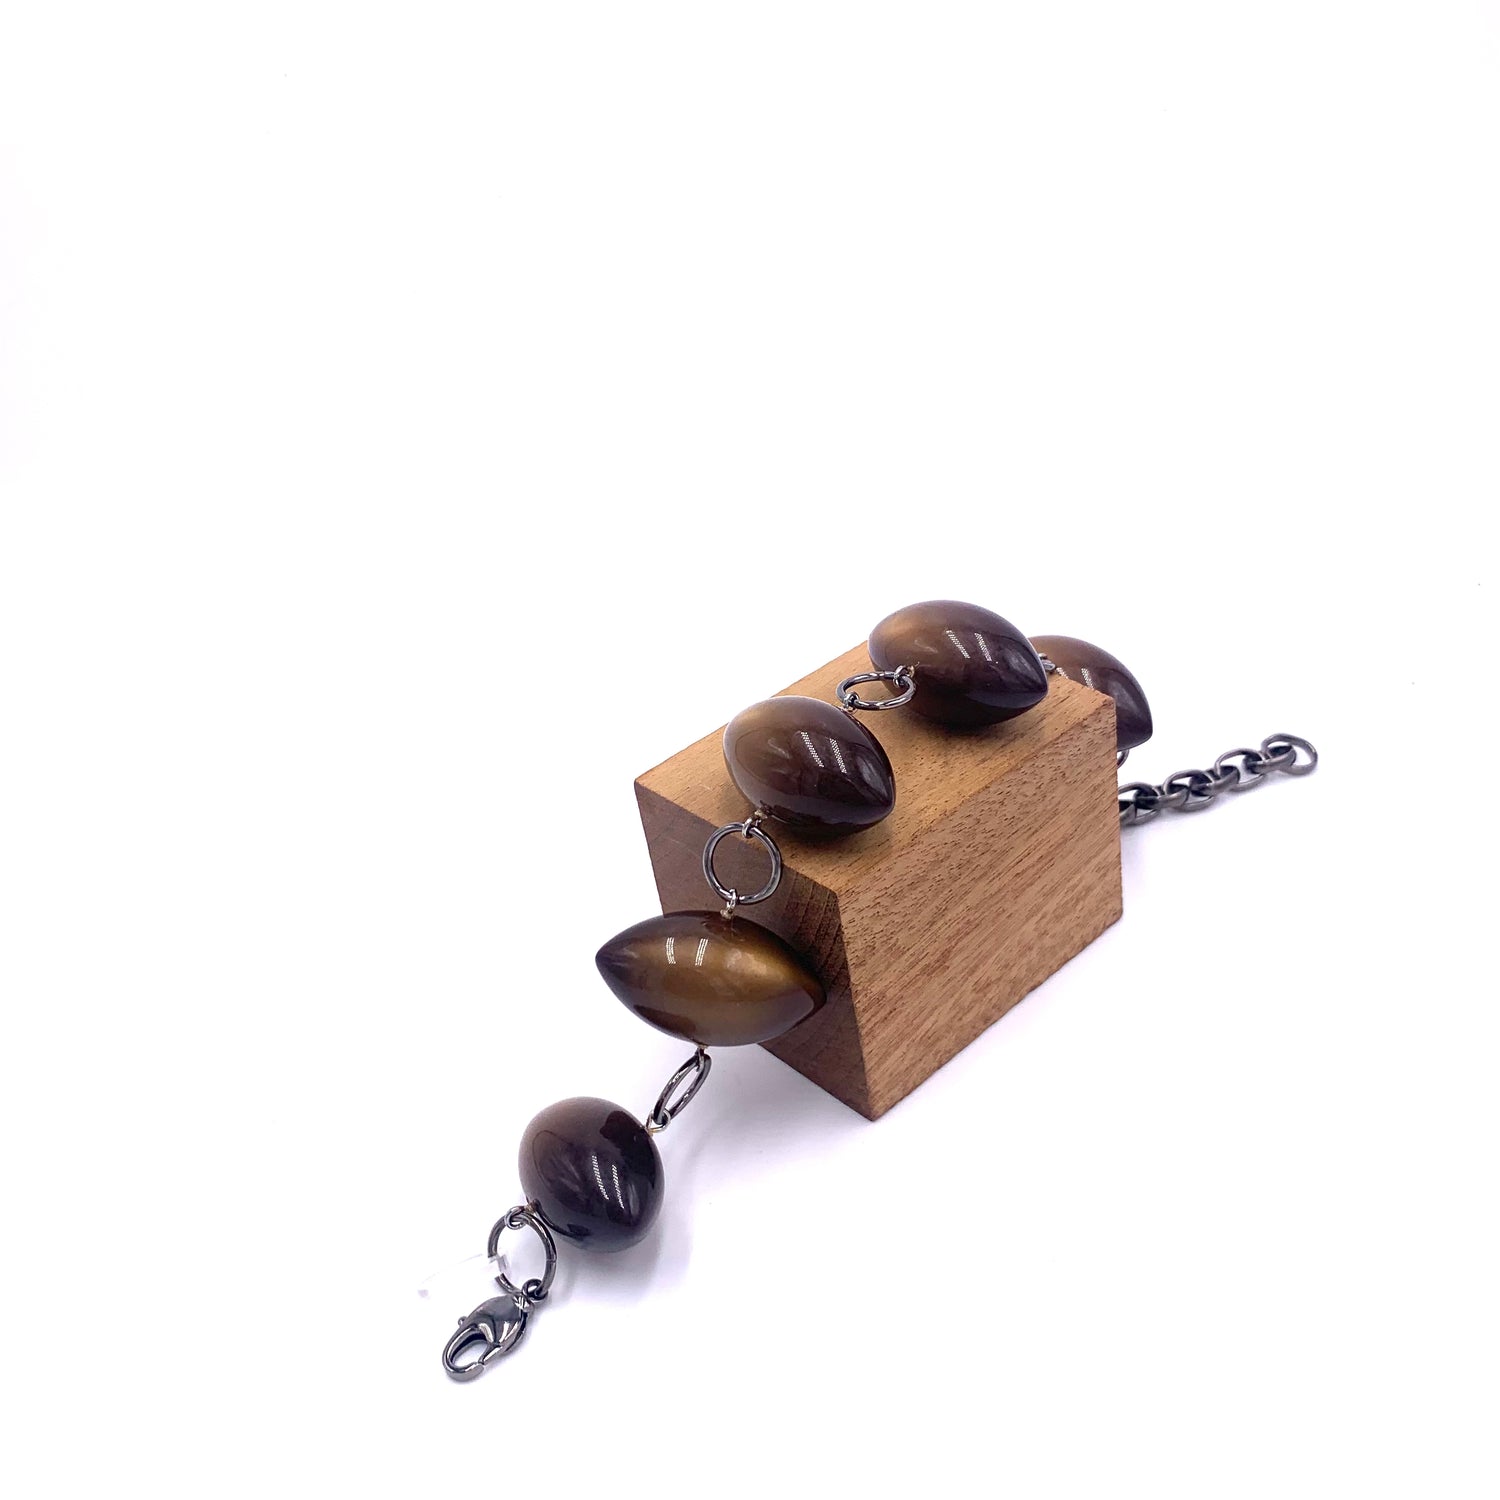 Chocolate Moonglow Pod Stations Bracelet